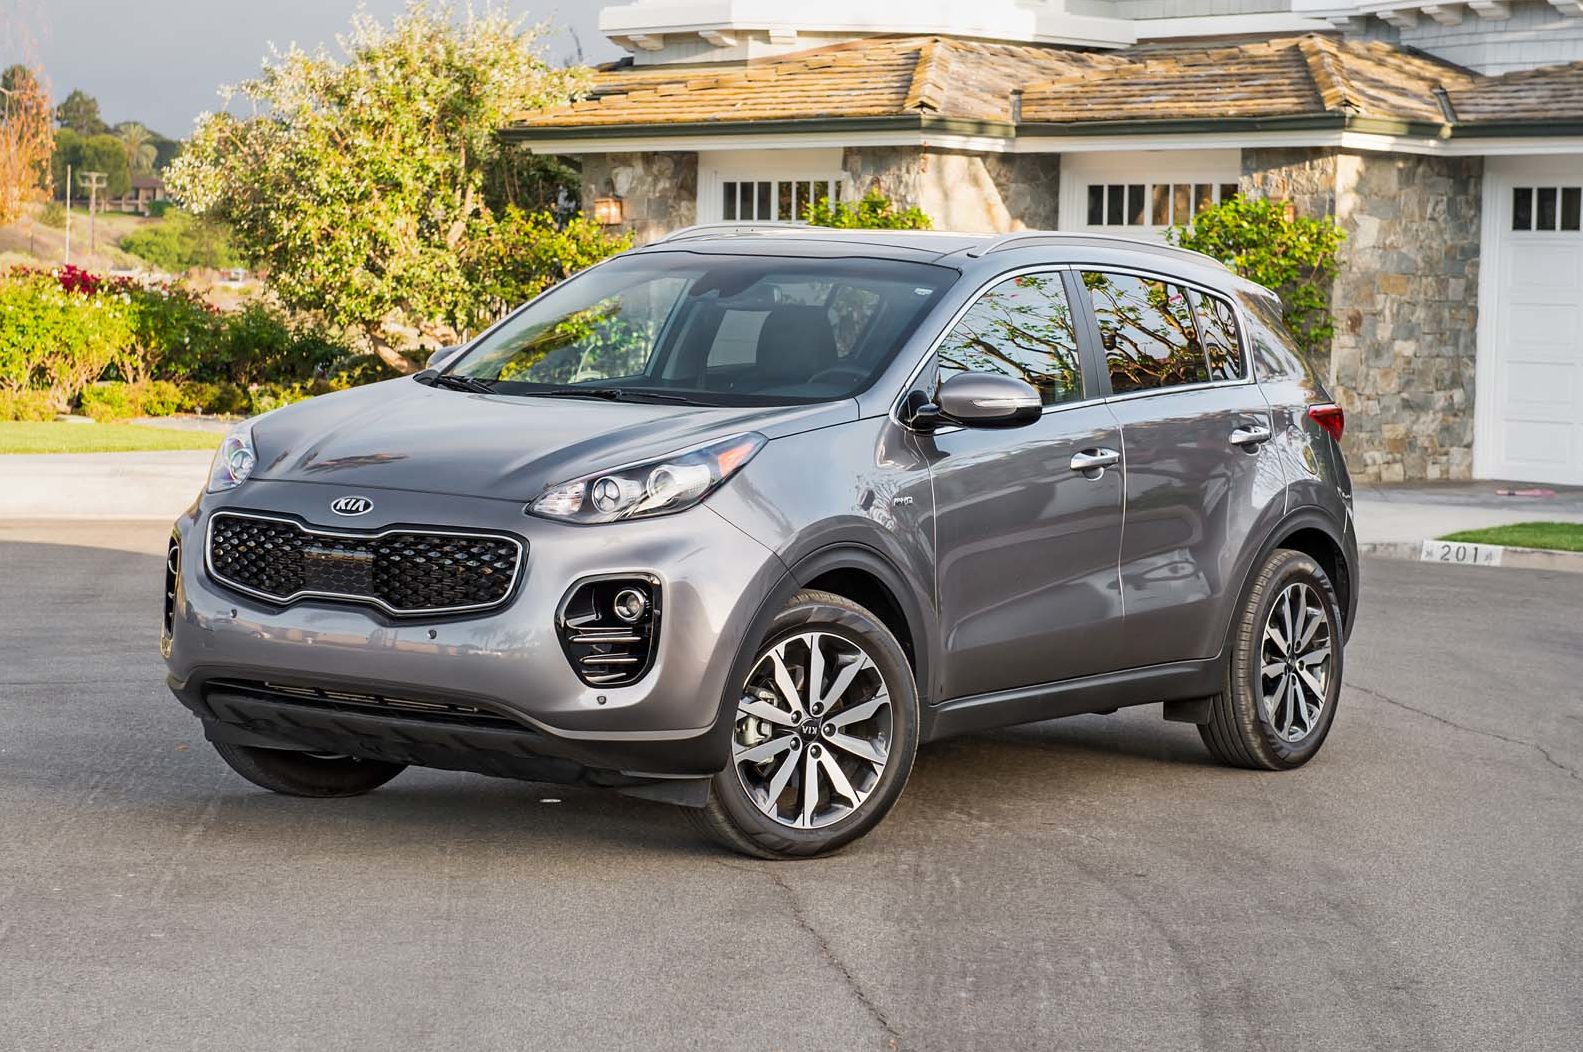 2017 Kia Sportage EX AWD Update 7: Six Interior Details I've Come to Love